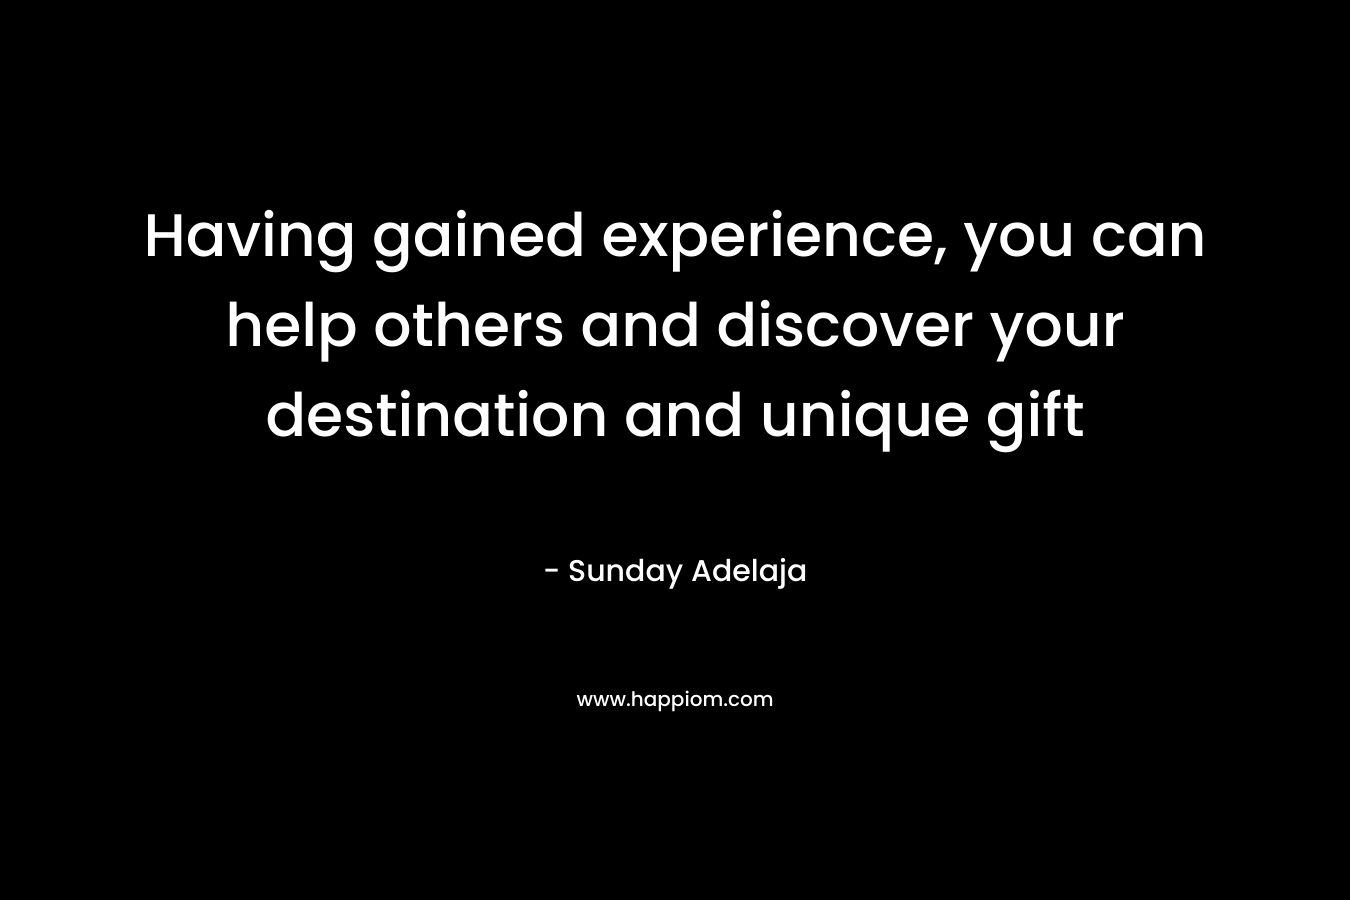 Having gained experience, you can help others and discover your destination and unique gift